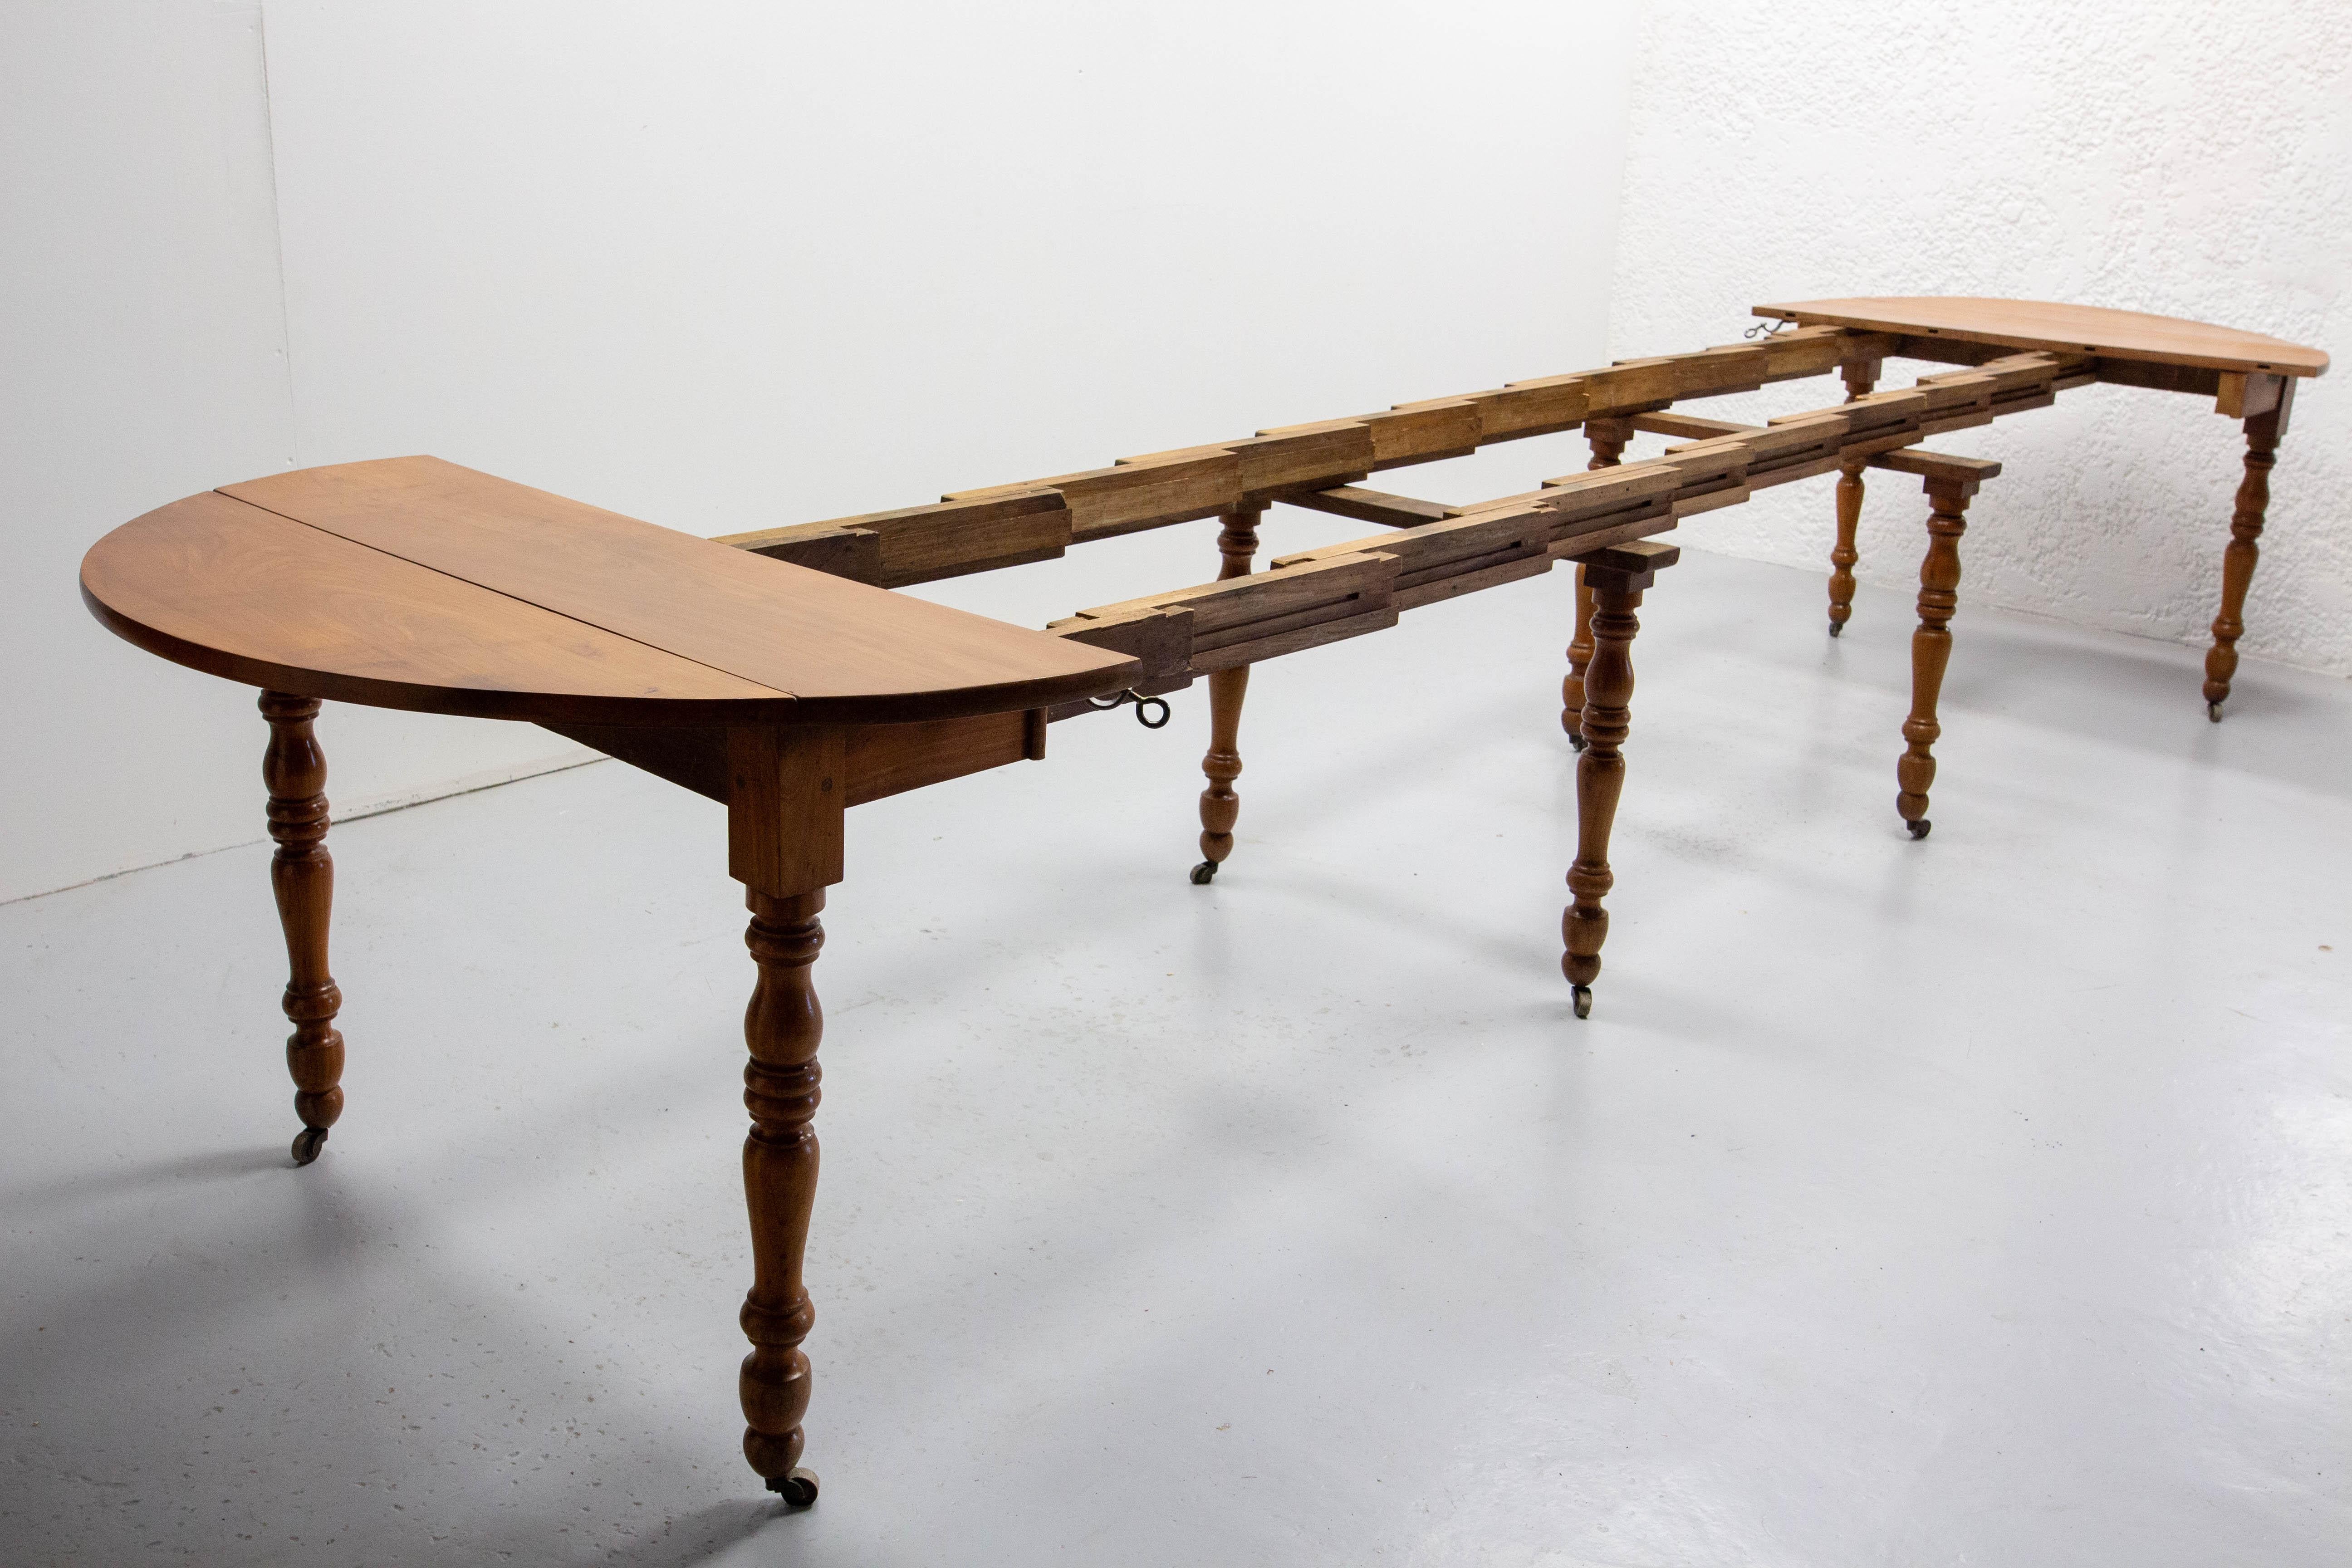 This walnut dining table of the Louis Philippe period was made in France in the first half of the 19th century.
Almost two centuries old, it is in an exceptional state of preservation for its age.
When the leaves are folded, the table is 24.41 in.